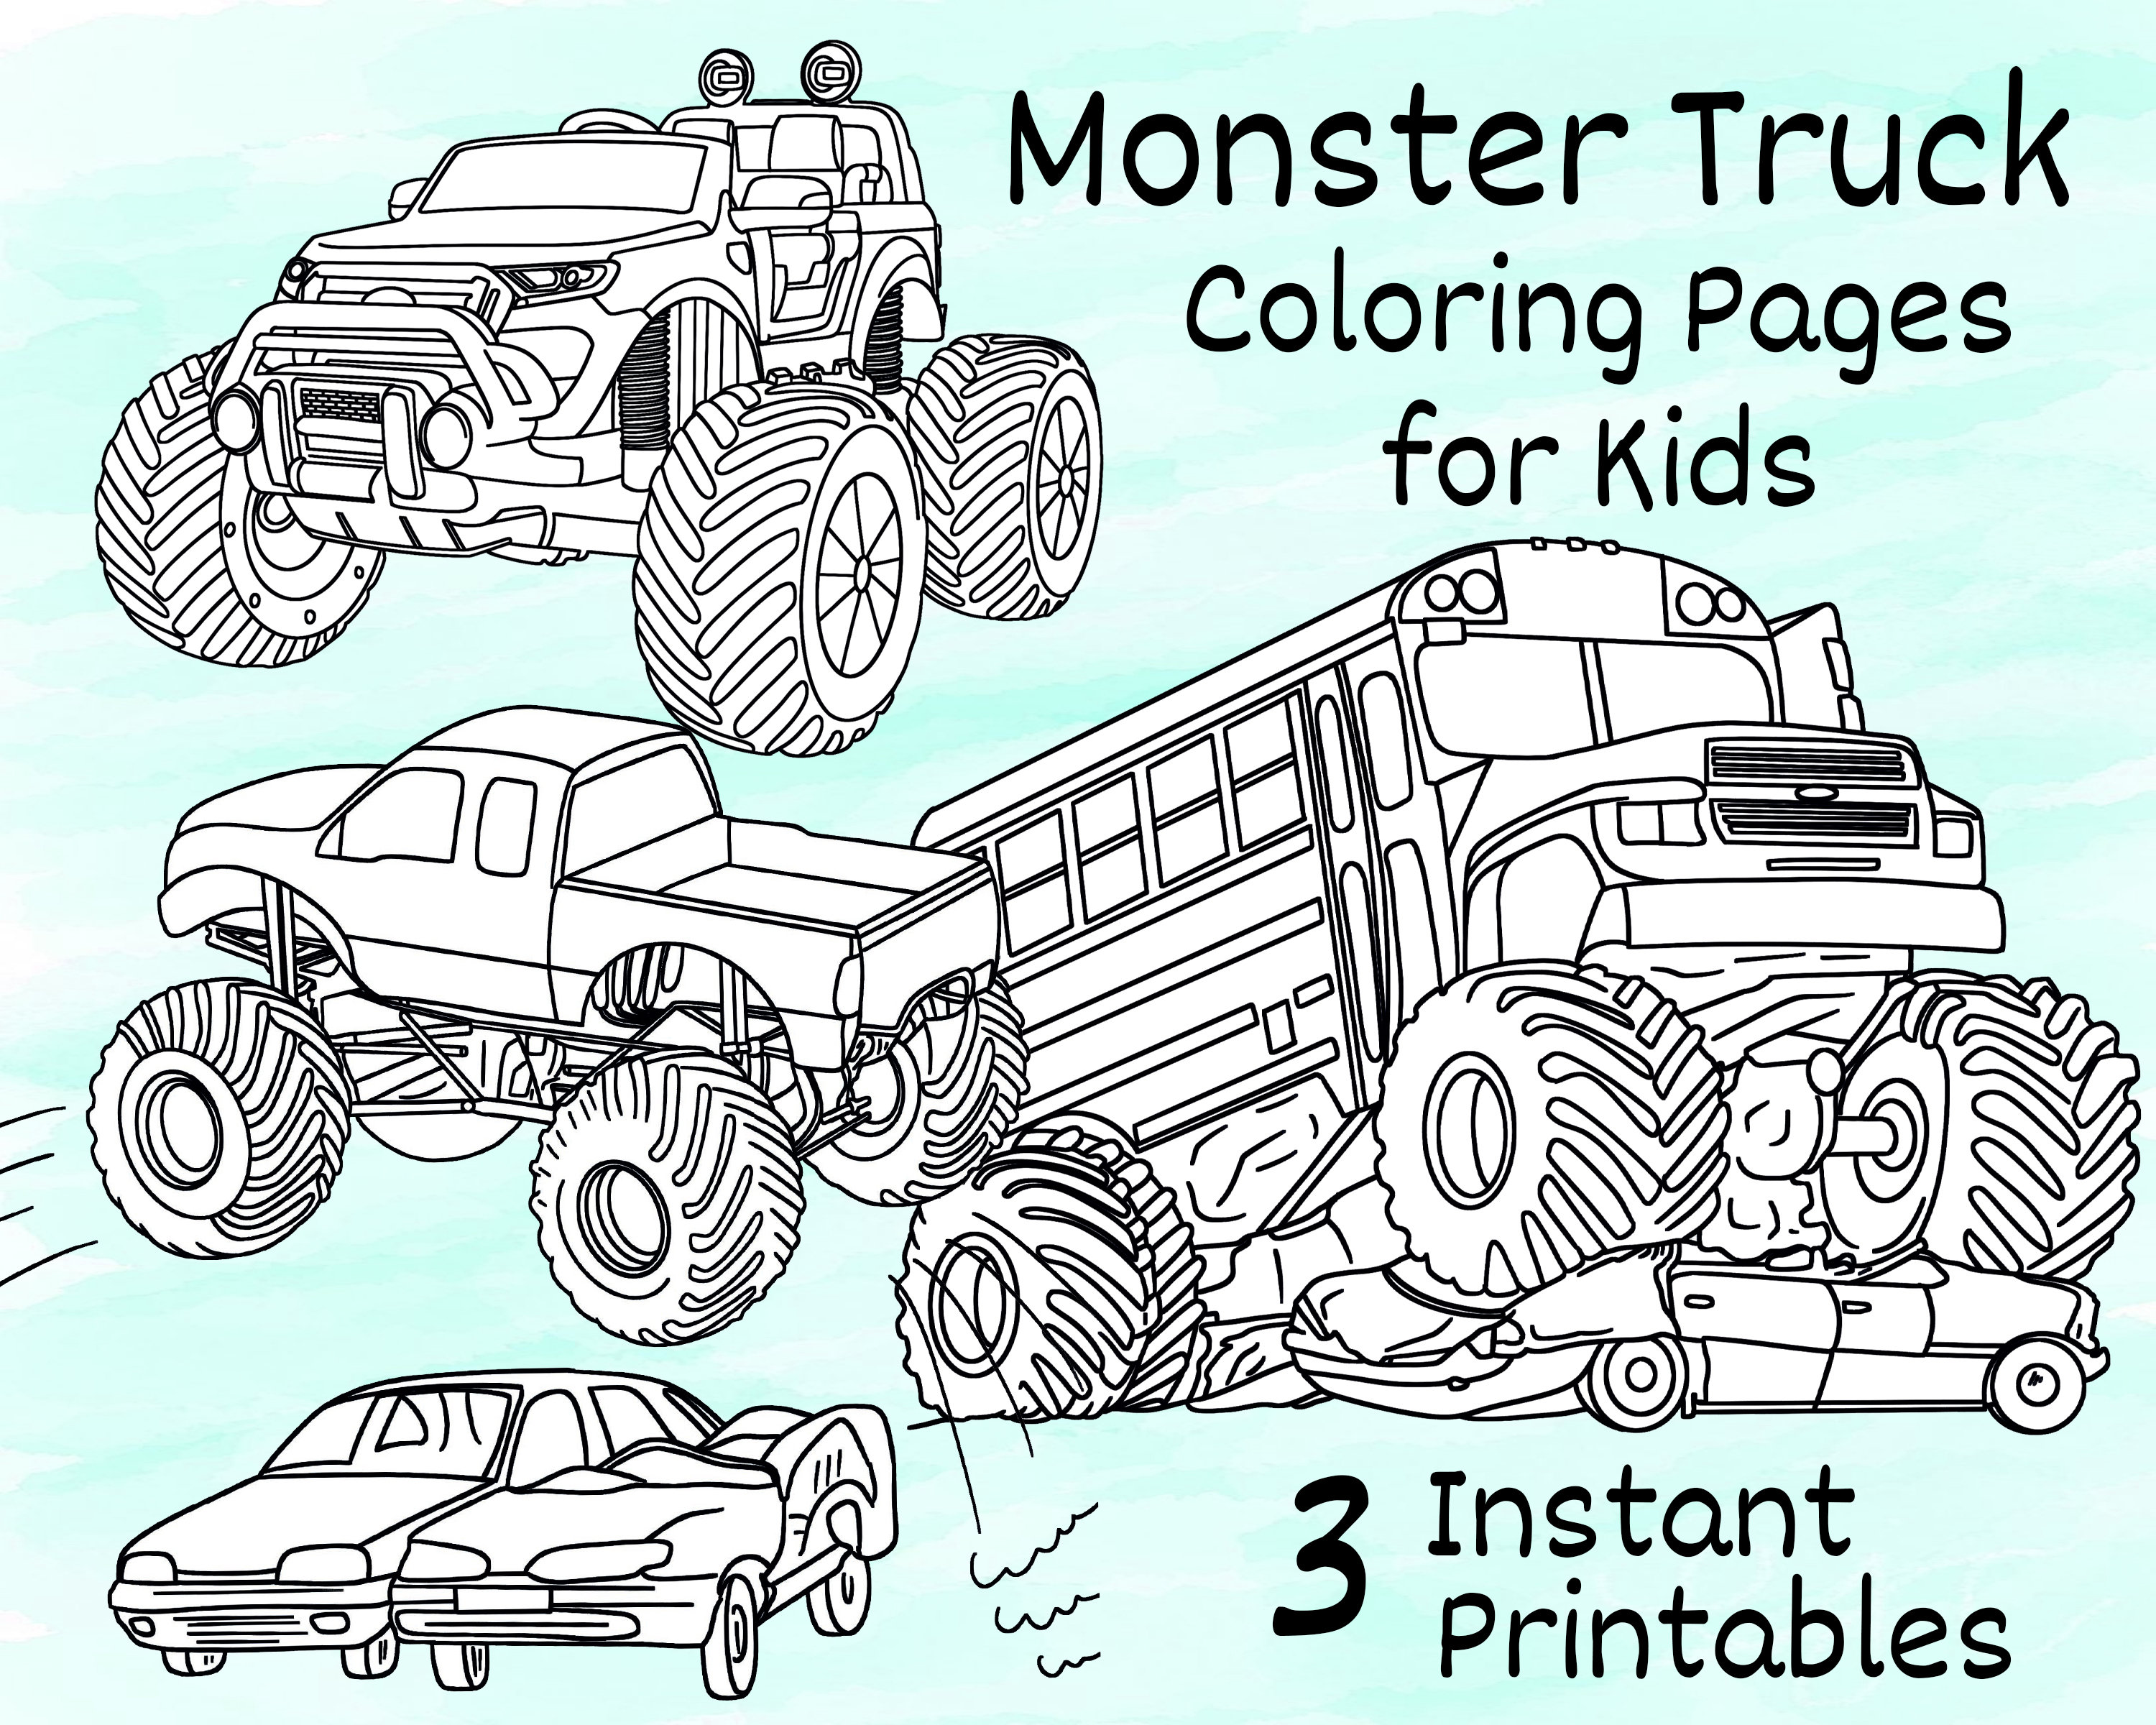 Monster truck coloring pages for kids printable coloring pages of monster trucks for girls and boys